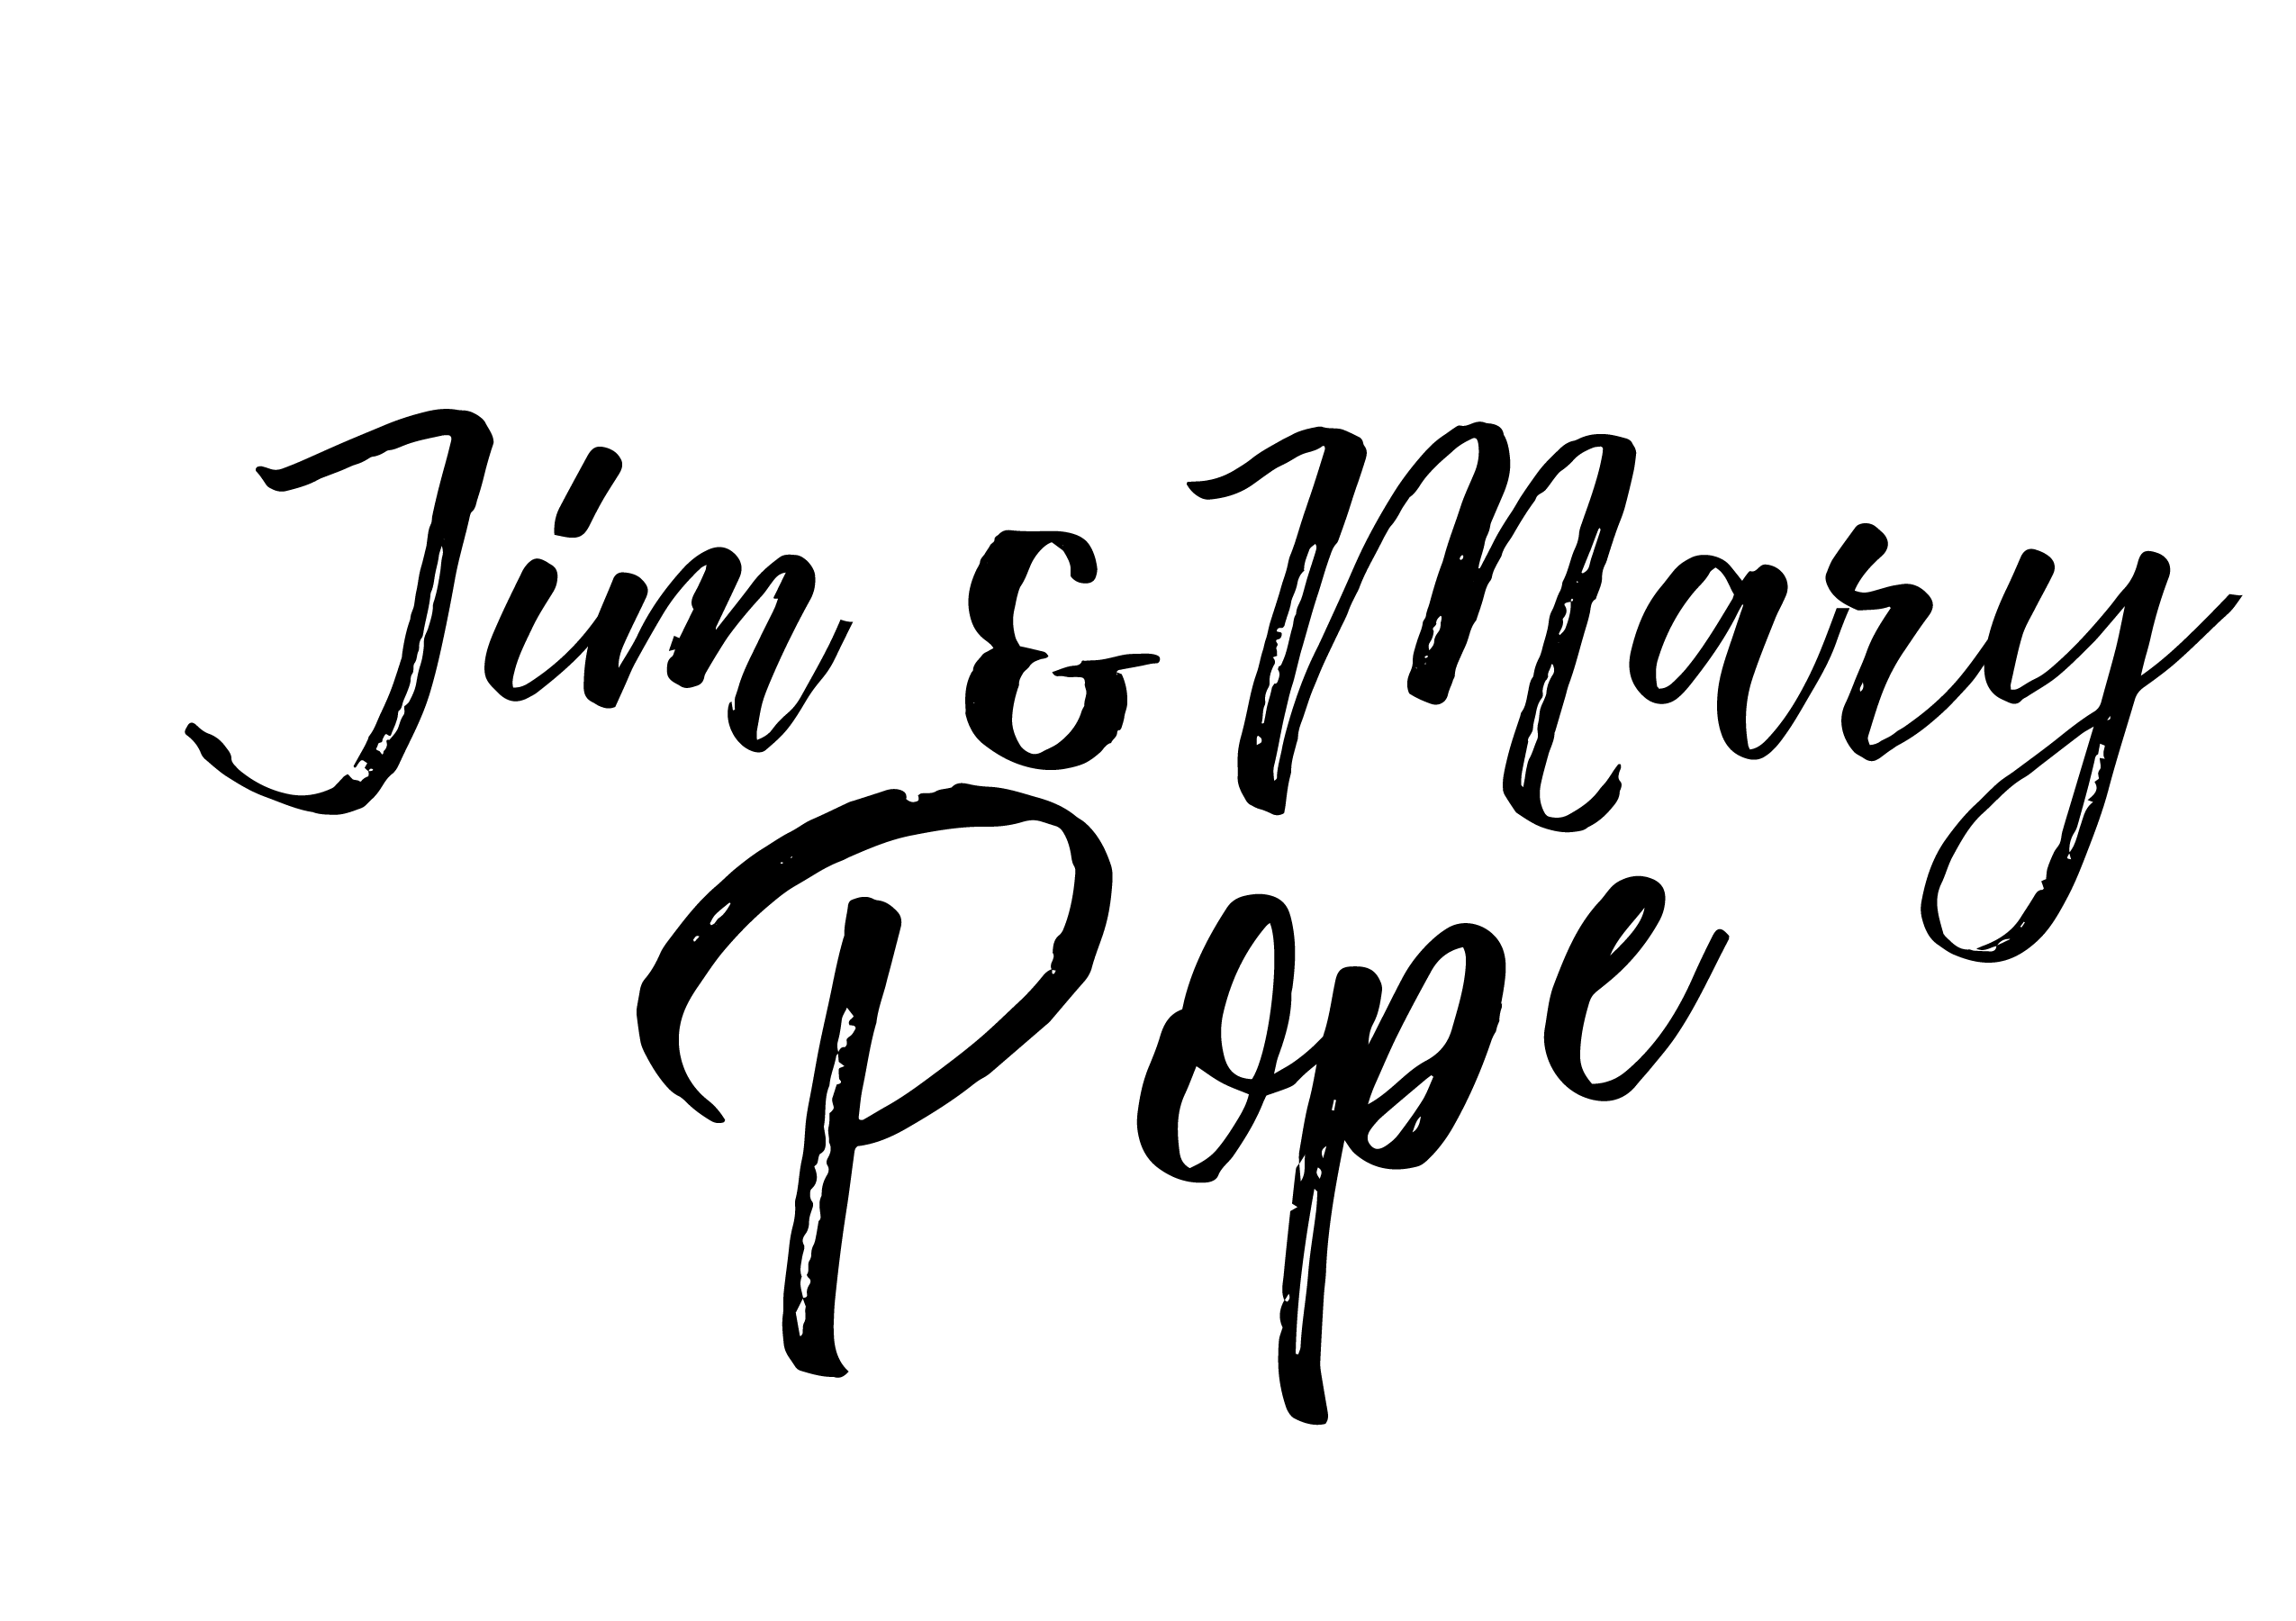 Jim & Mary Pope